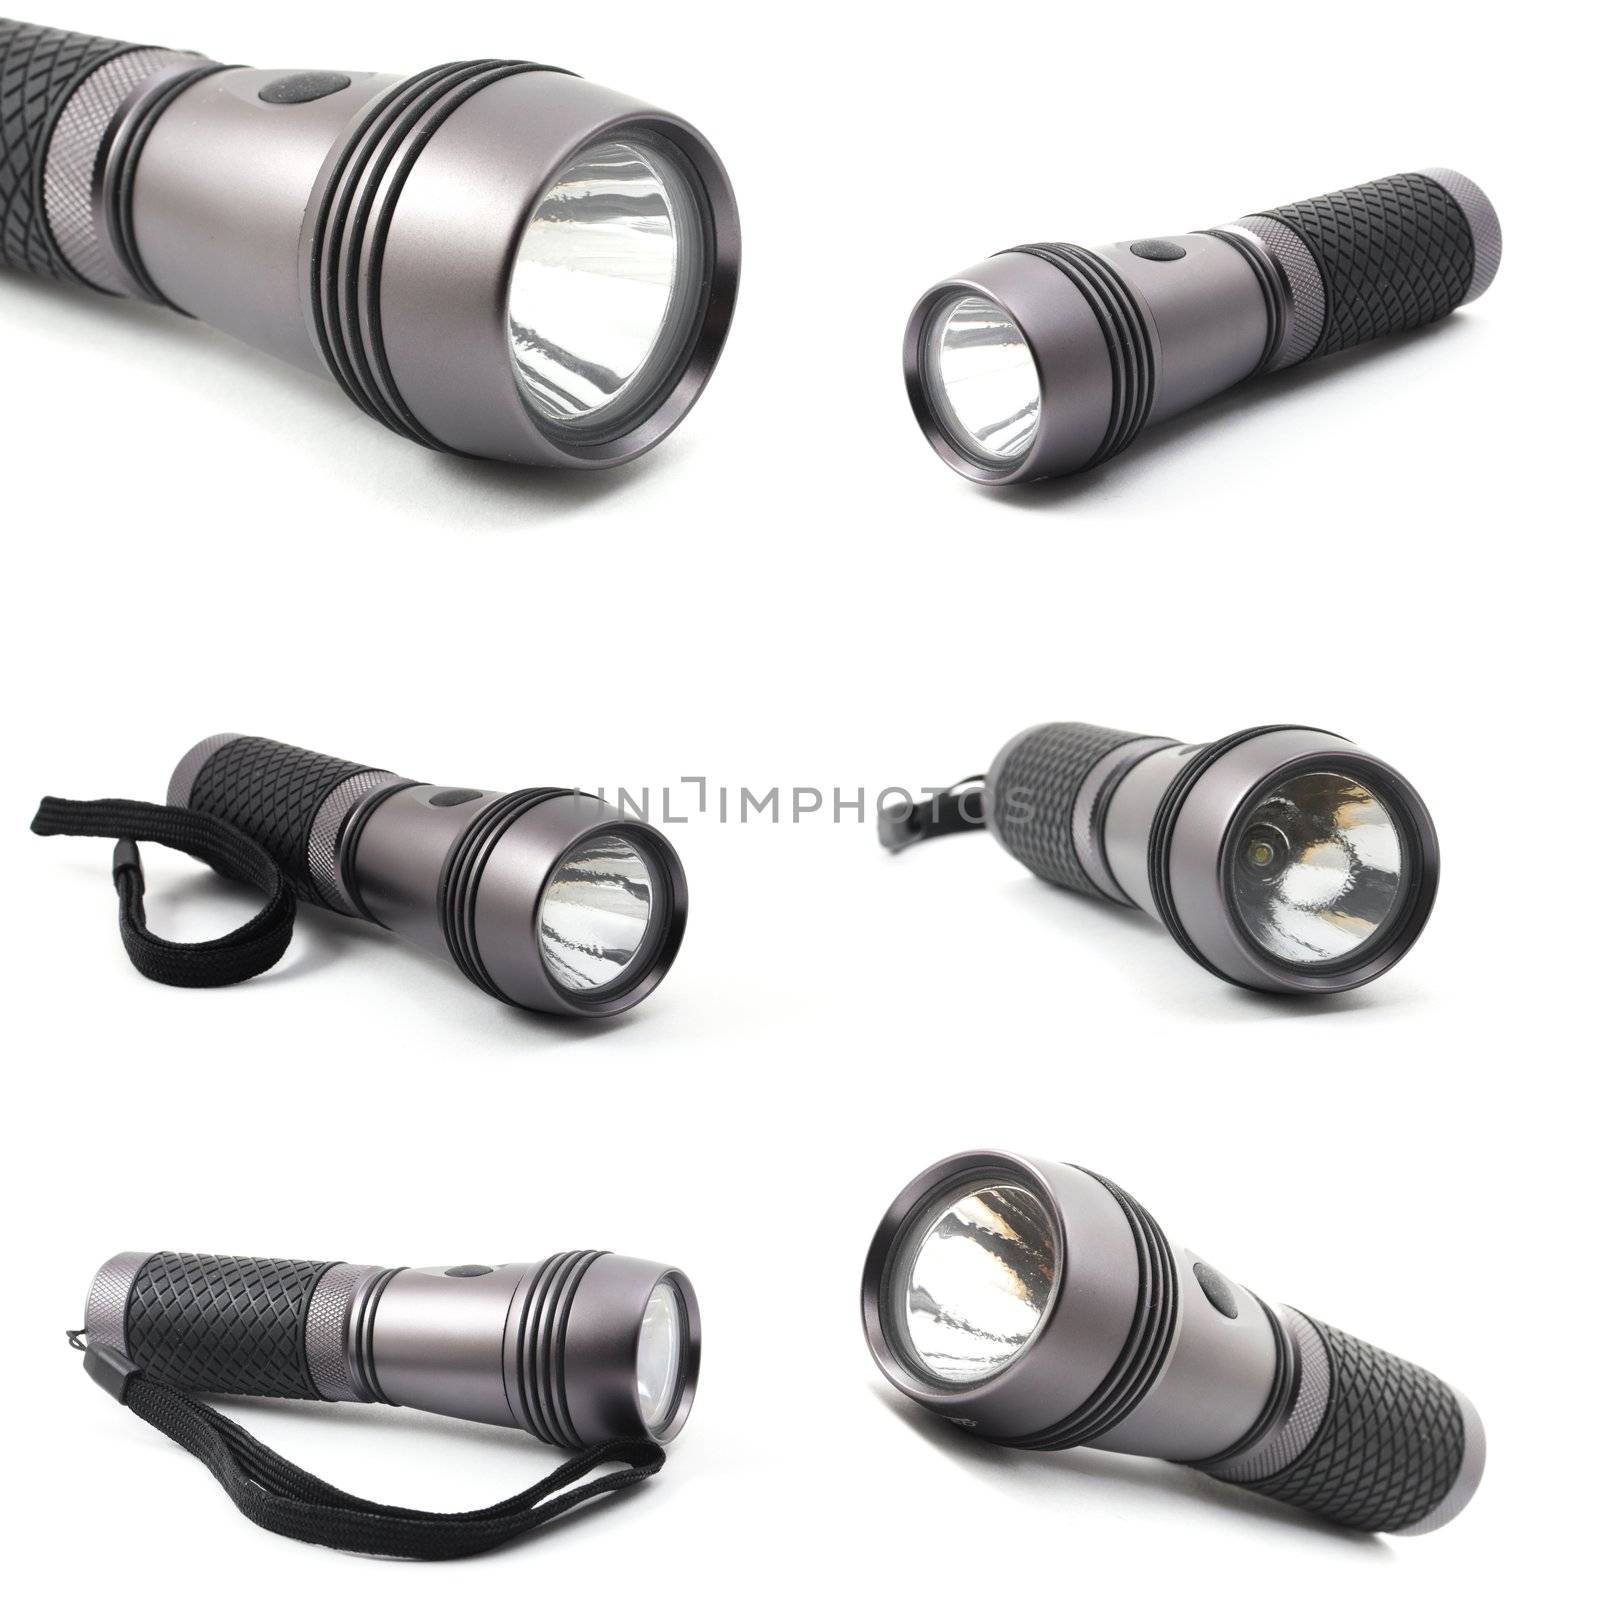 flashlight collection isolated on a white background